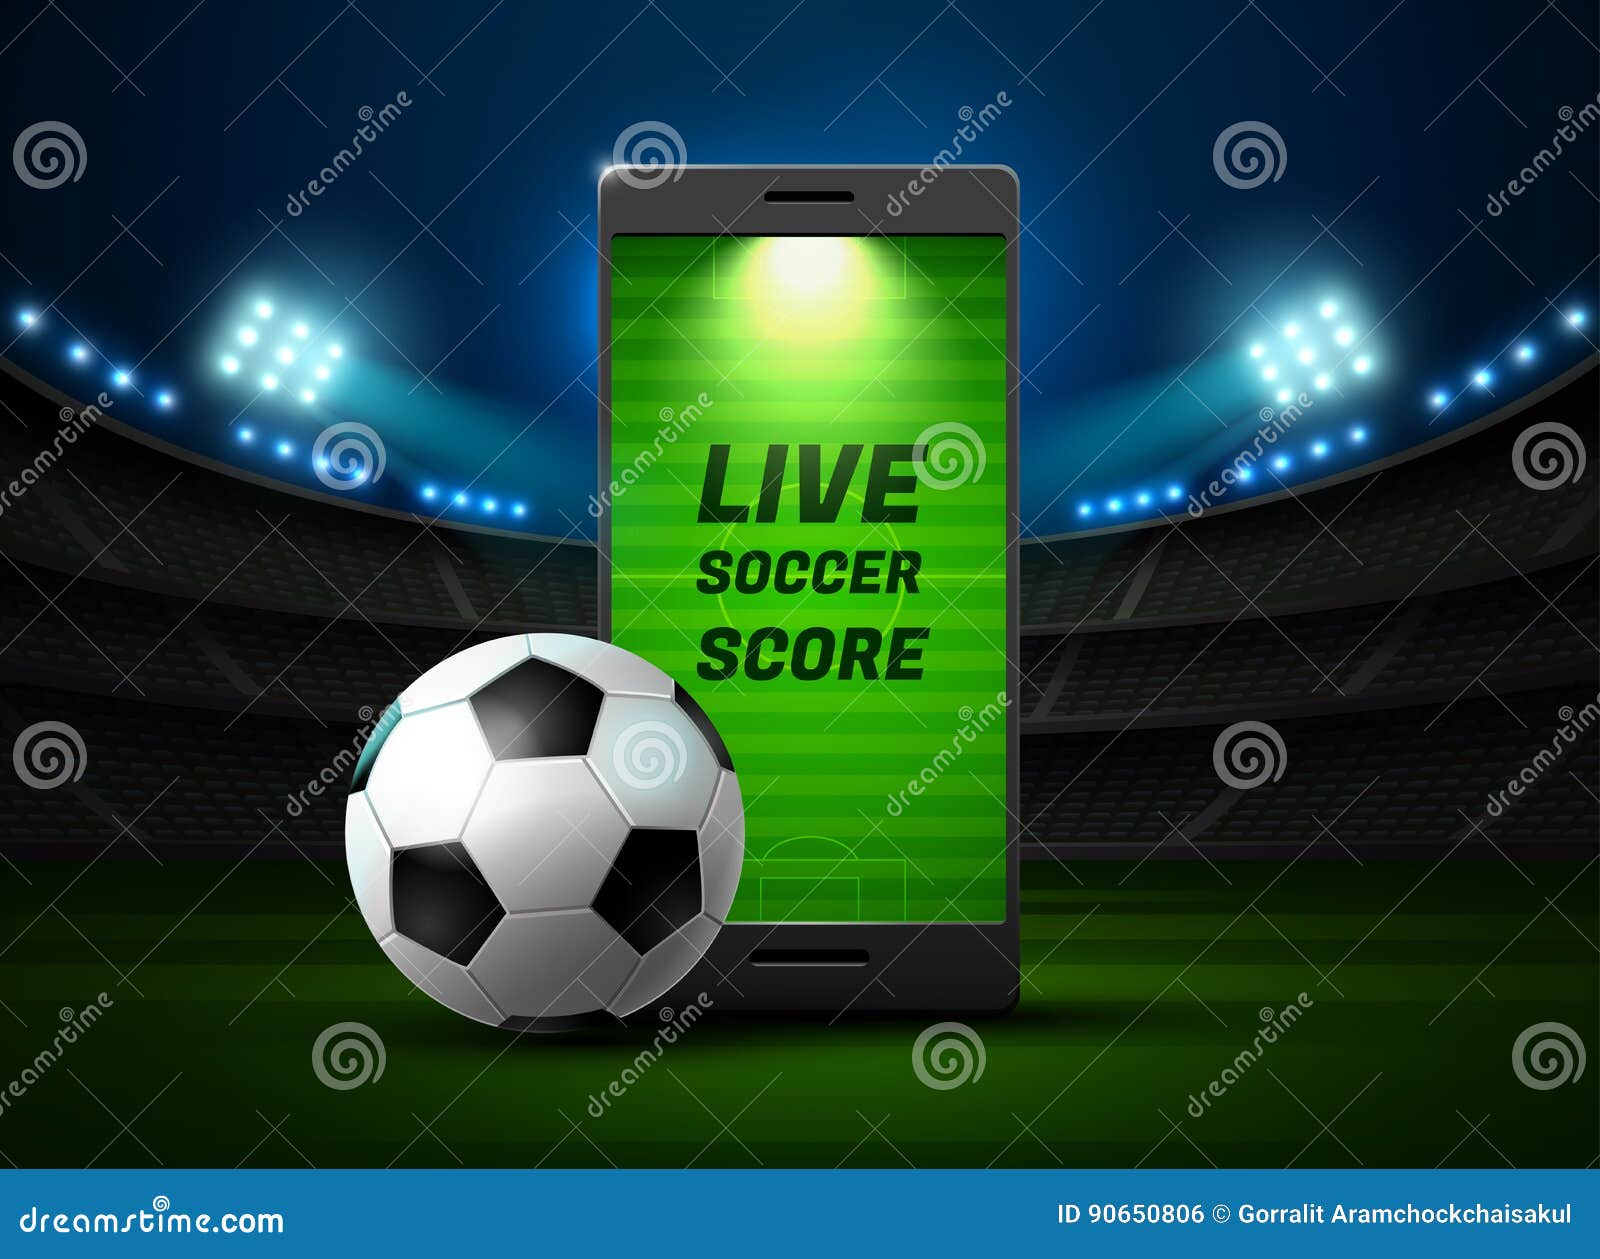 Mobile Football and Score Online Stock Vector